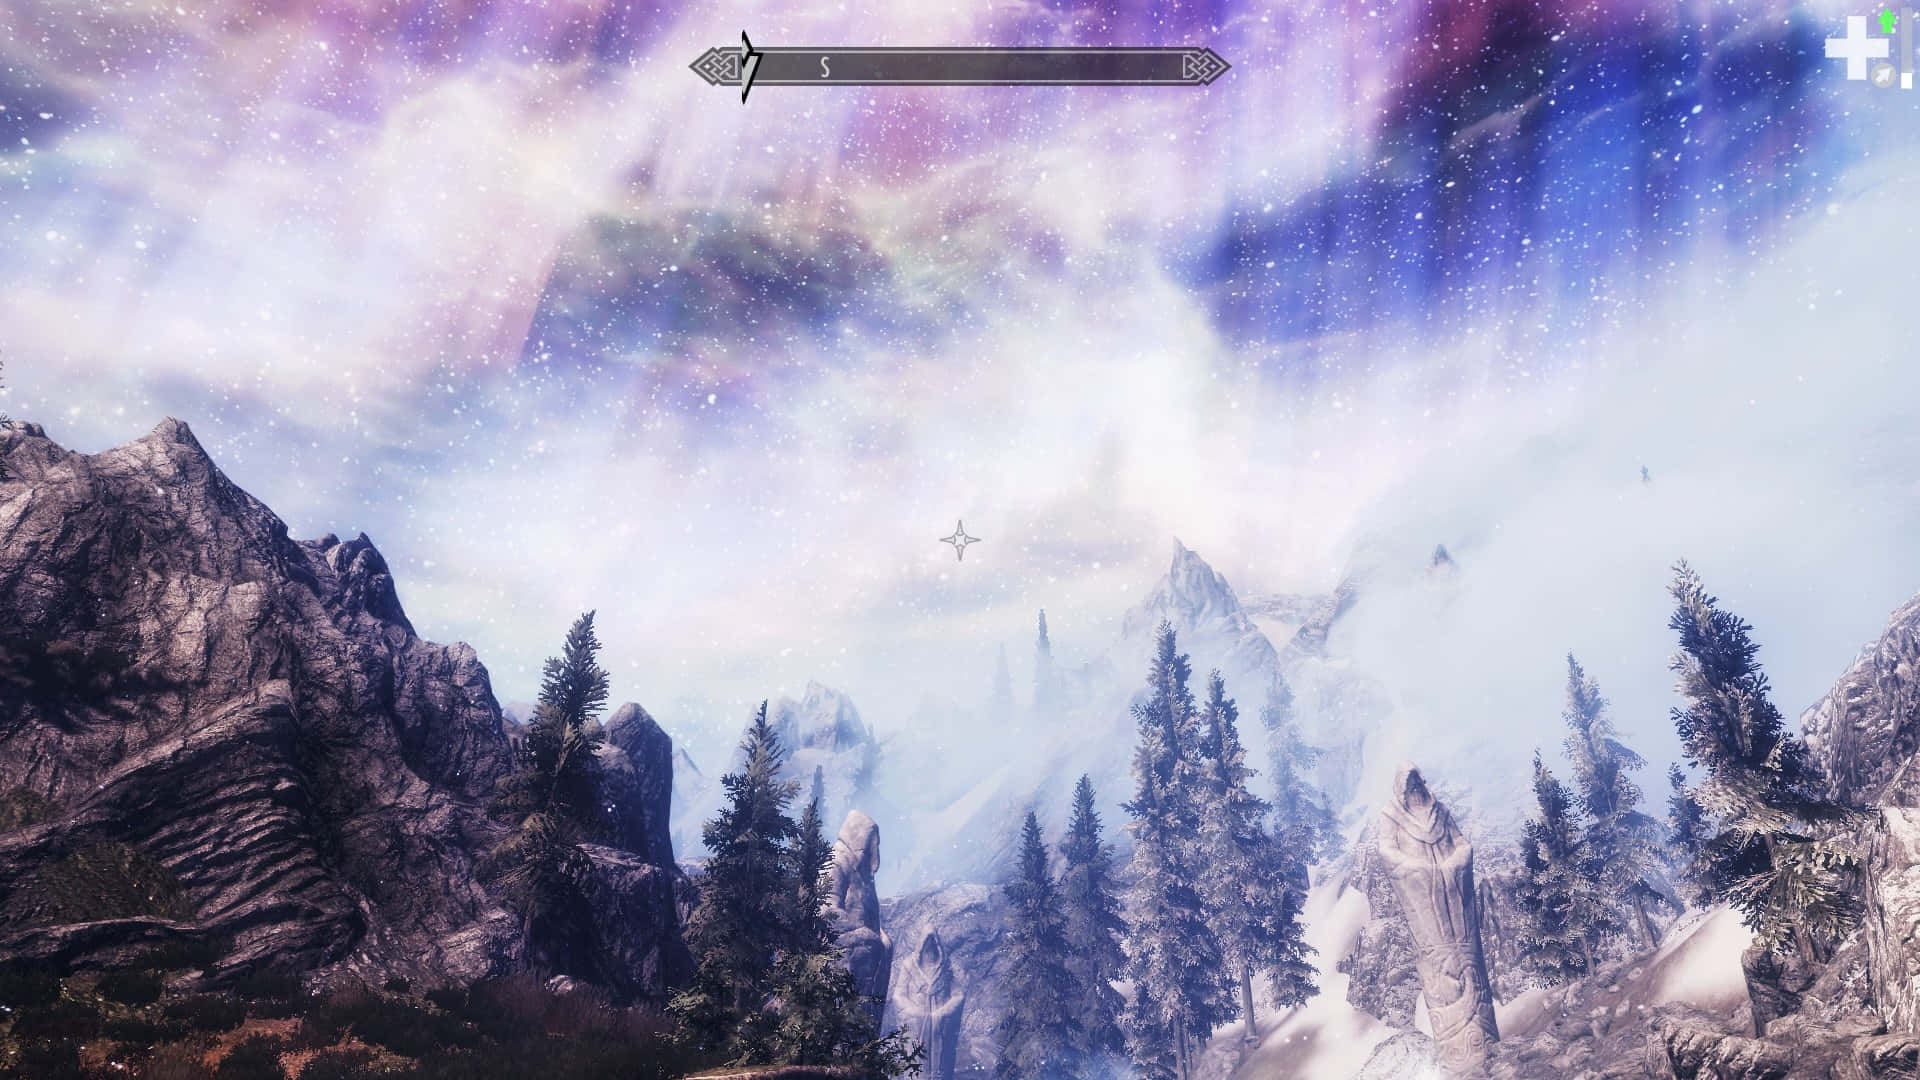 Caption: A mystical journey to Sovngarde, the Nordic afterlife in the Elder Scrolls series. Wallpaper